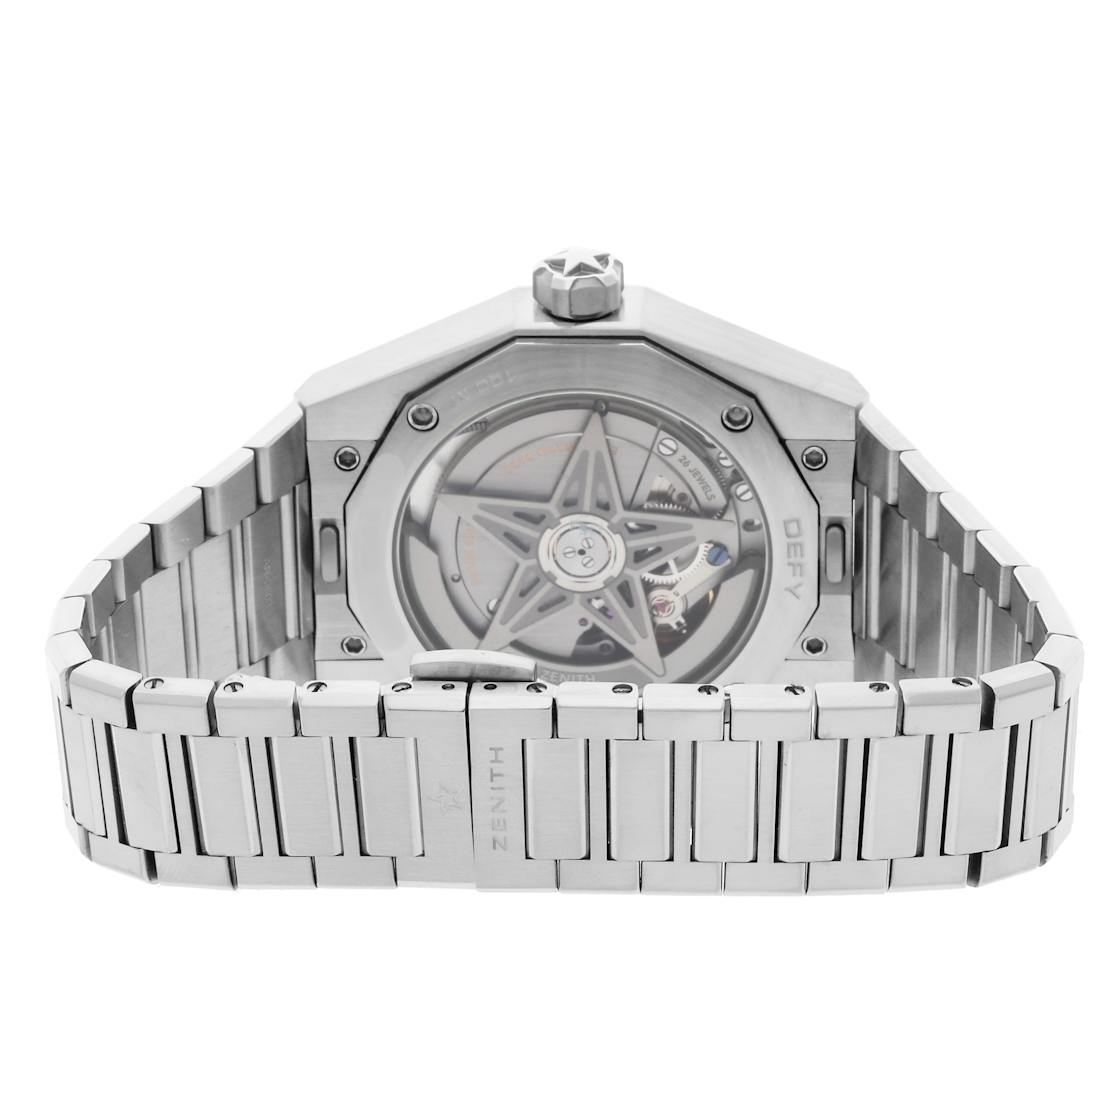 Zenith Defy Skyline Automatic 36 mm for $7,392 for sale from a Trusted  Seller on Chrono24